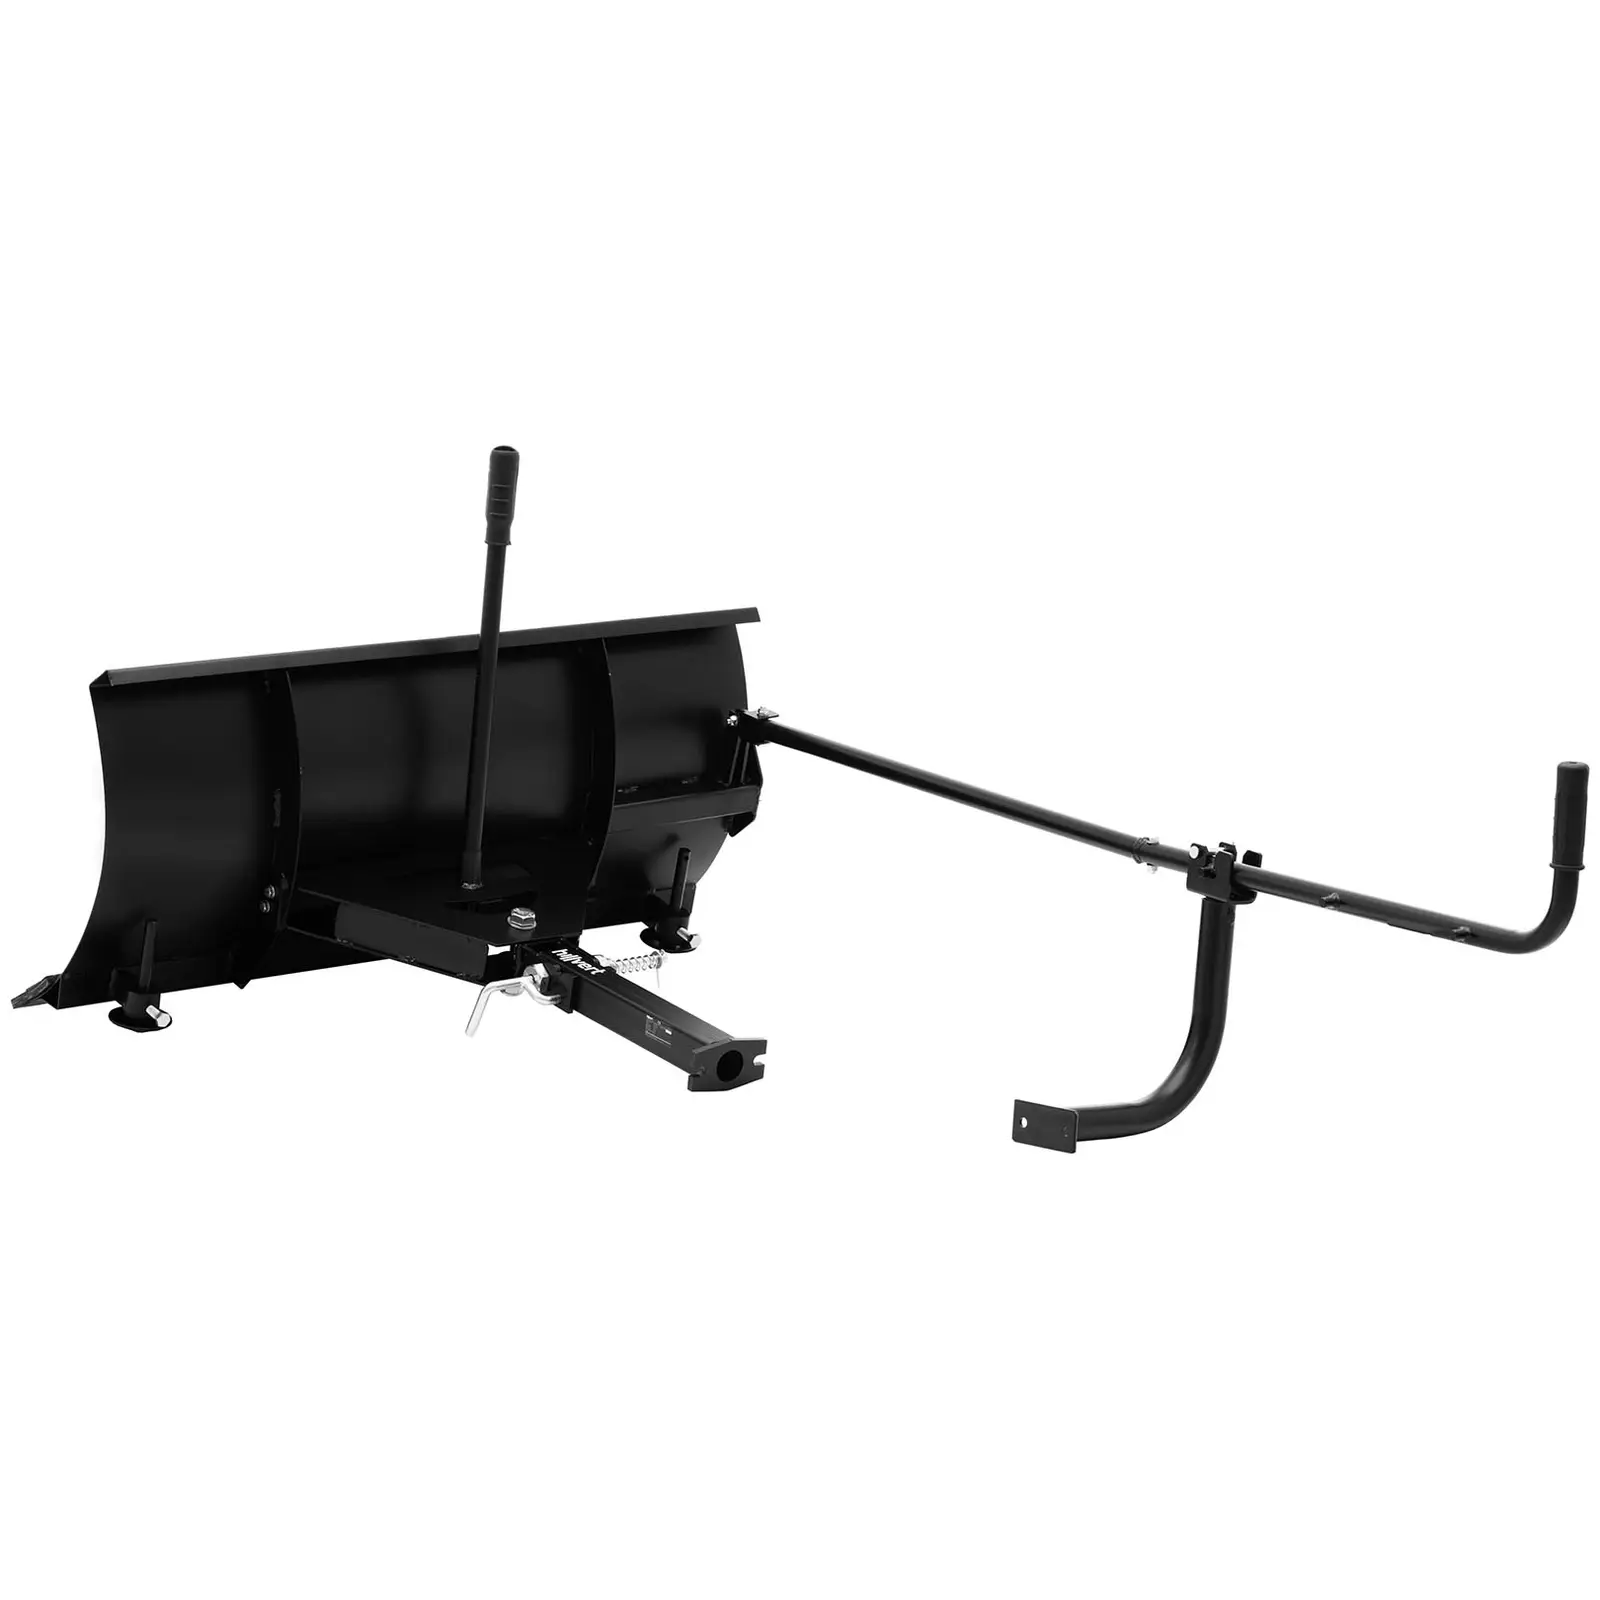 Snow Plough - 153 x 99 x 60 cm - steel - for track carrier HT-MD-300